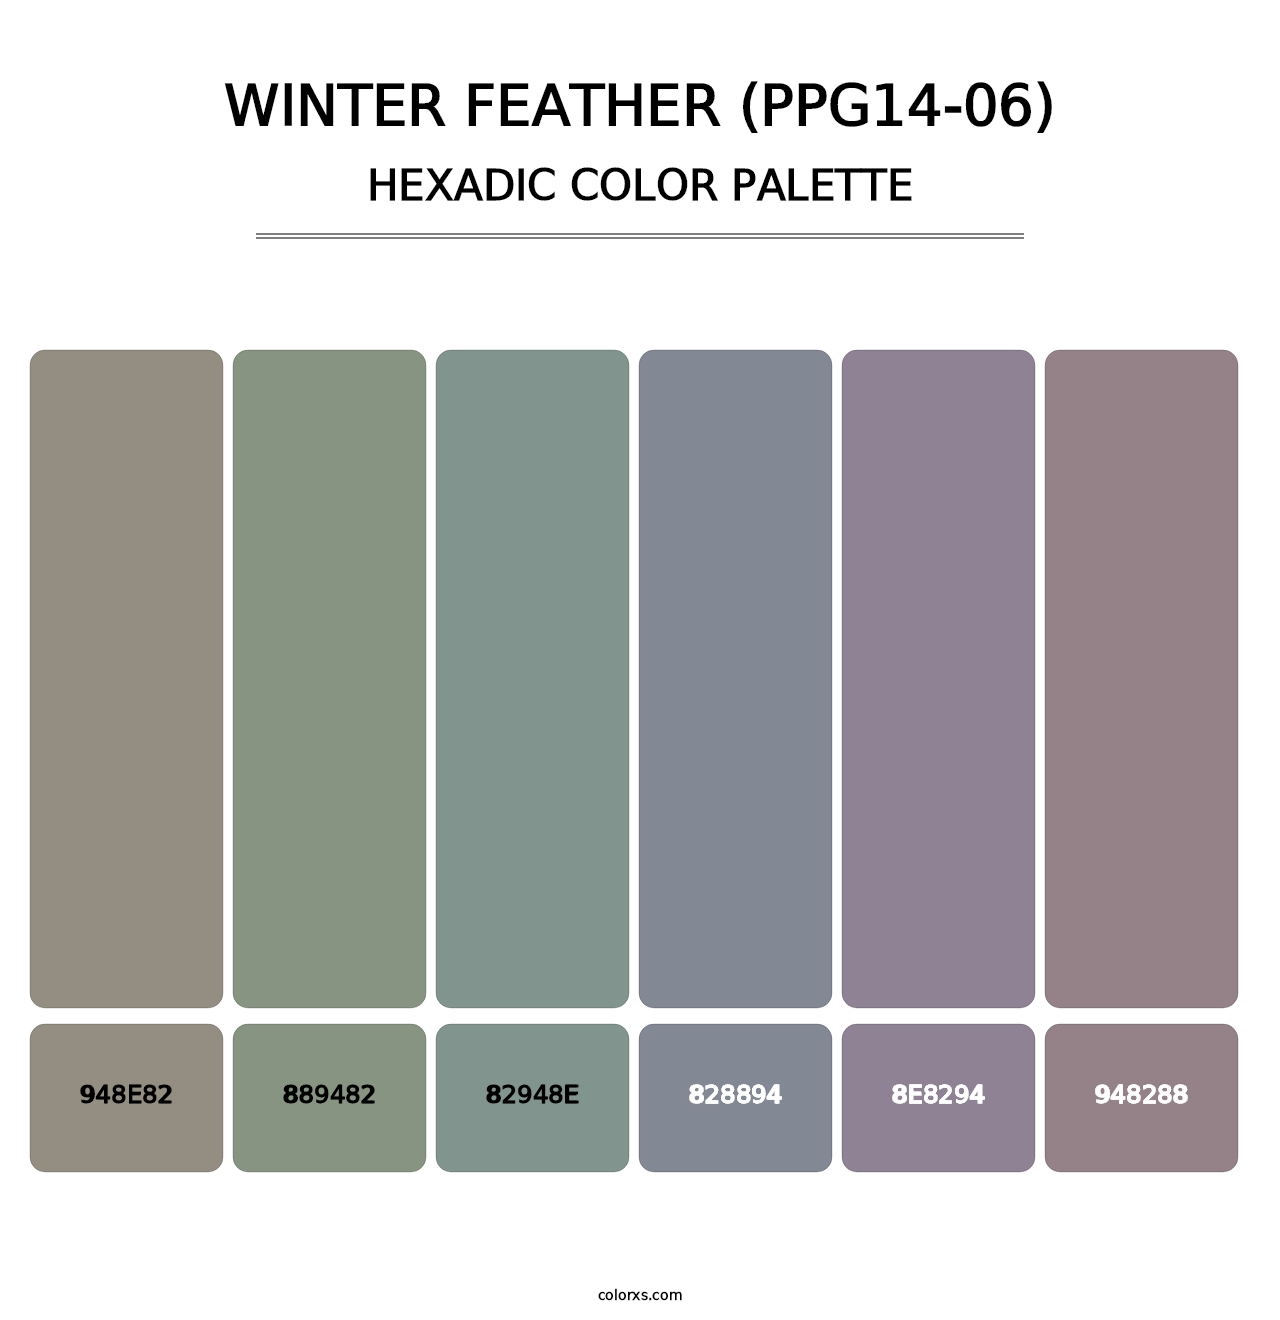 Winter Feather (PPG14-06) - Hexadic Color Palette